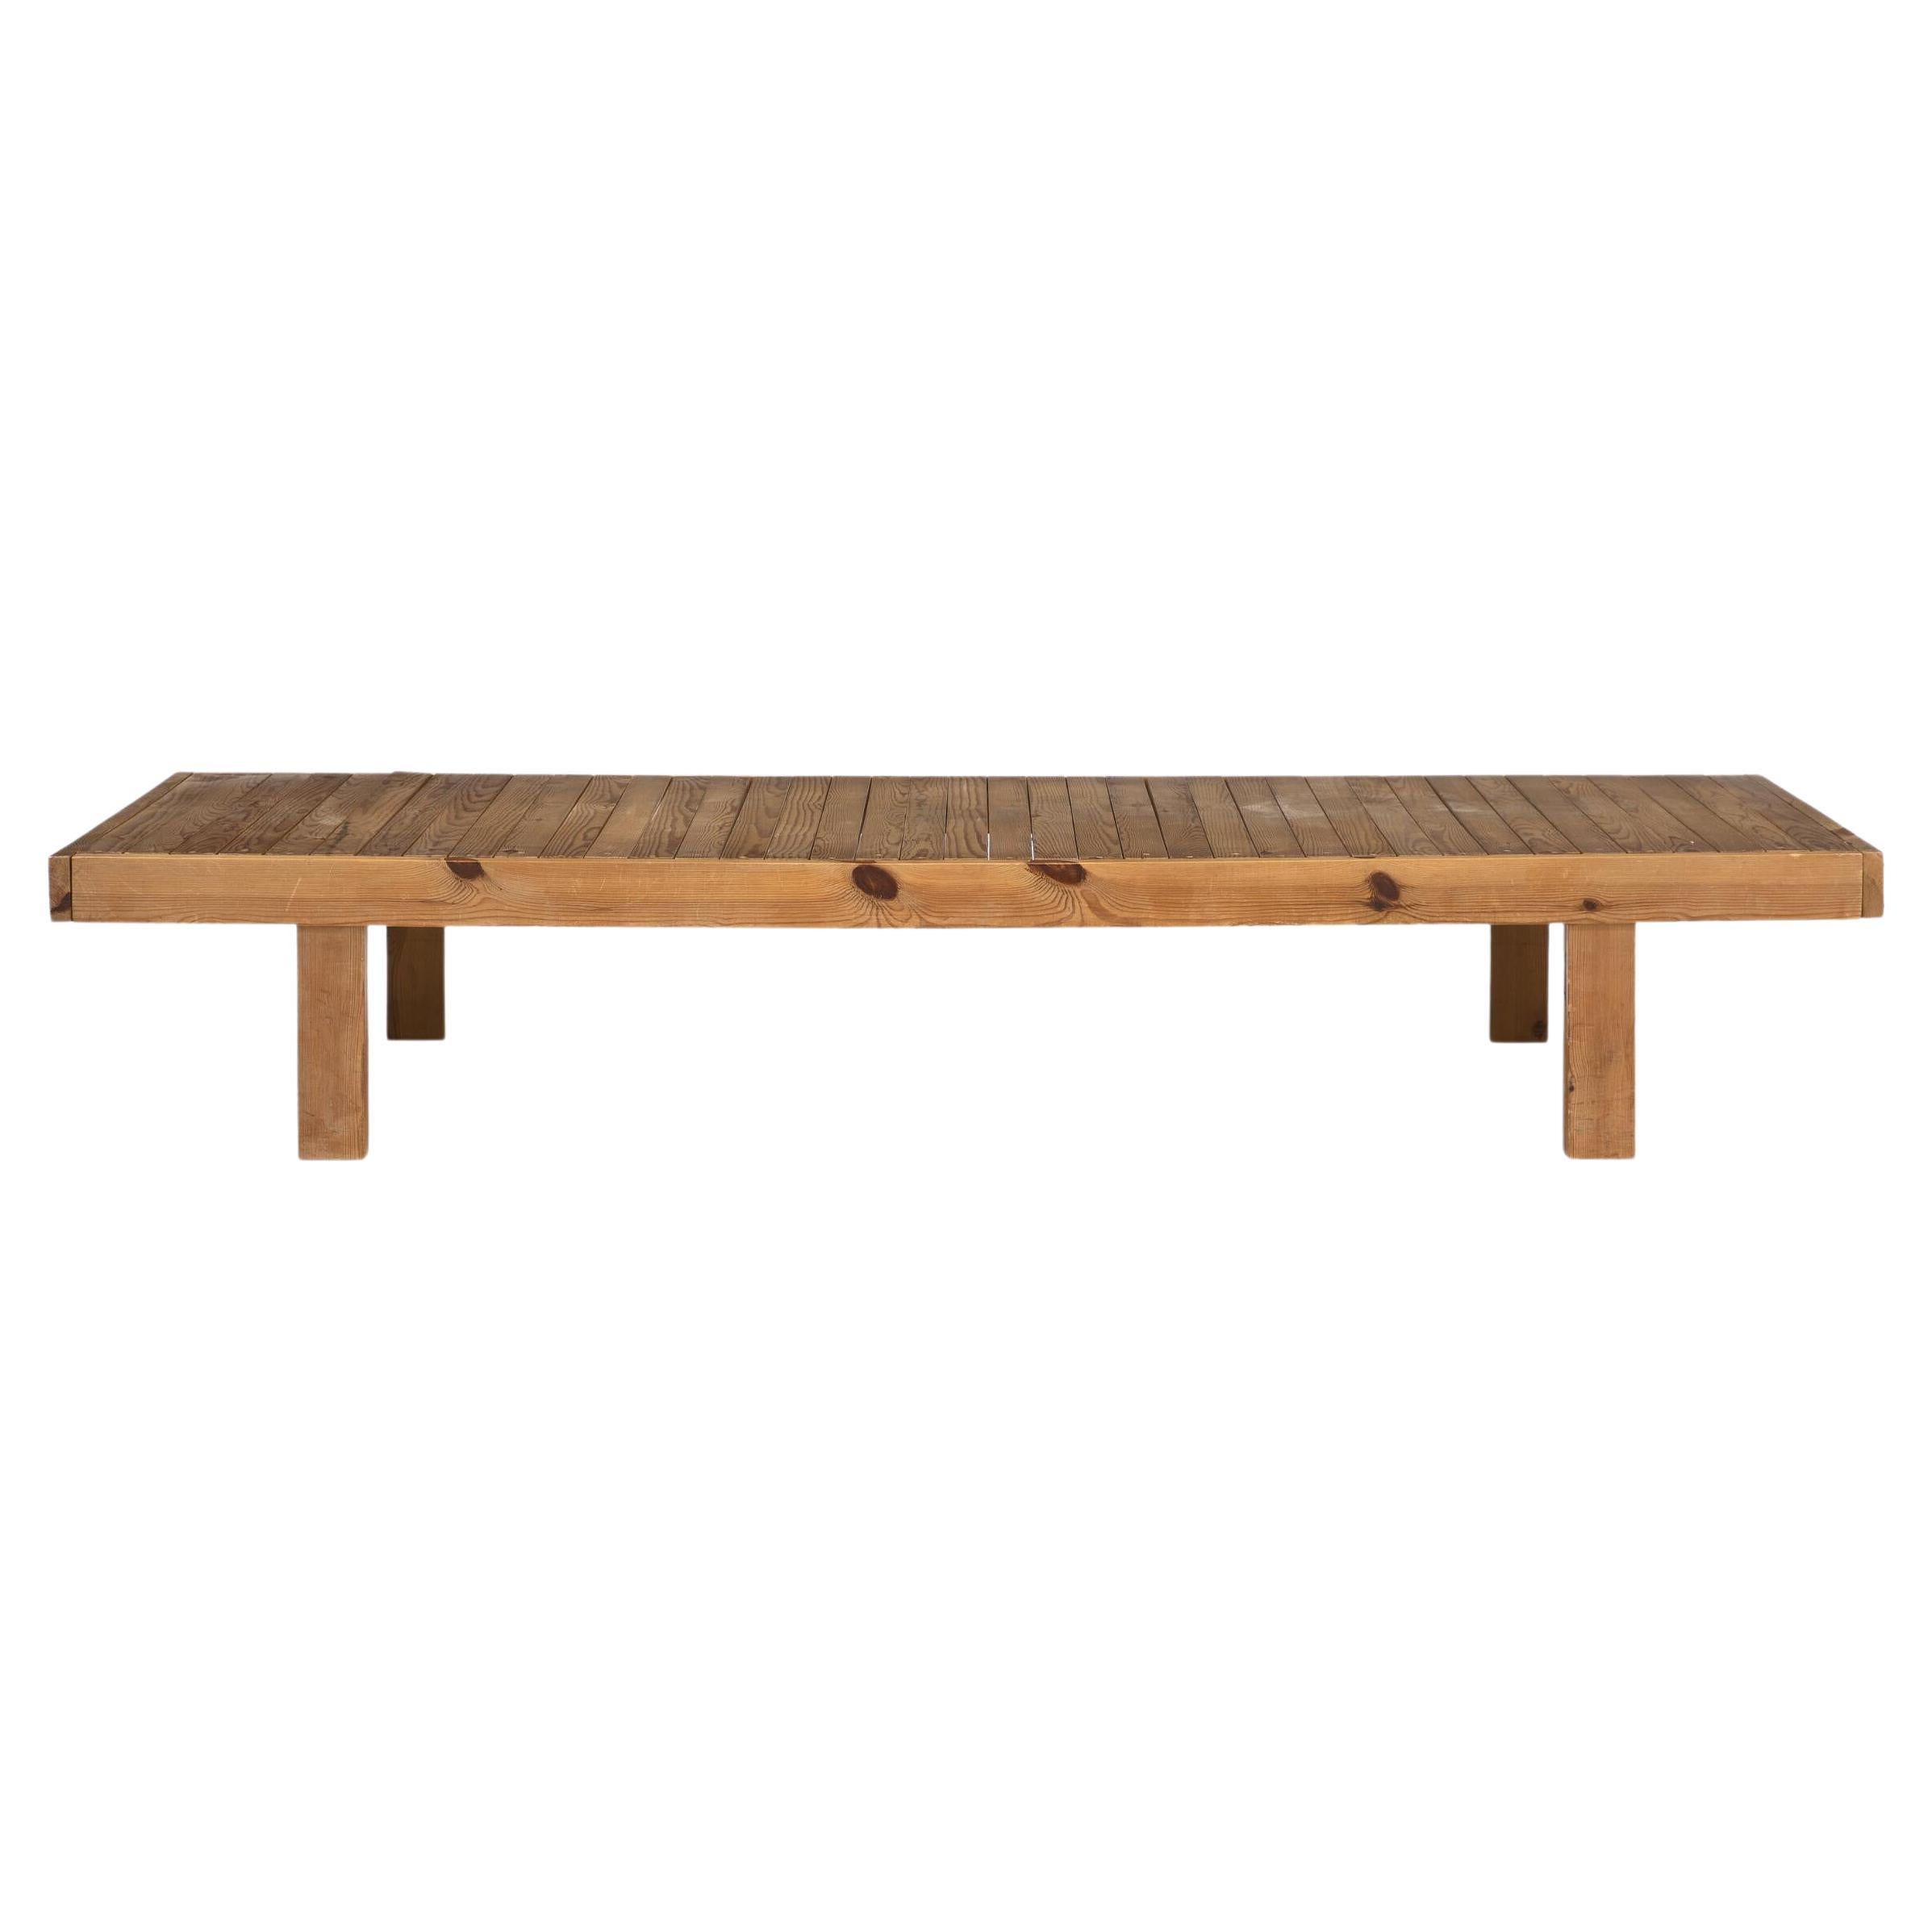 Danish Midcentury Daybed Bench Coffee Table in Pine Produced in Denmark, 1960s